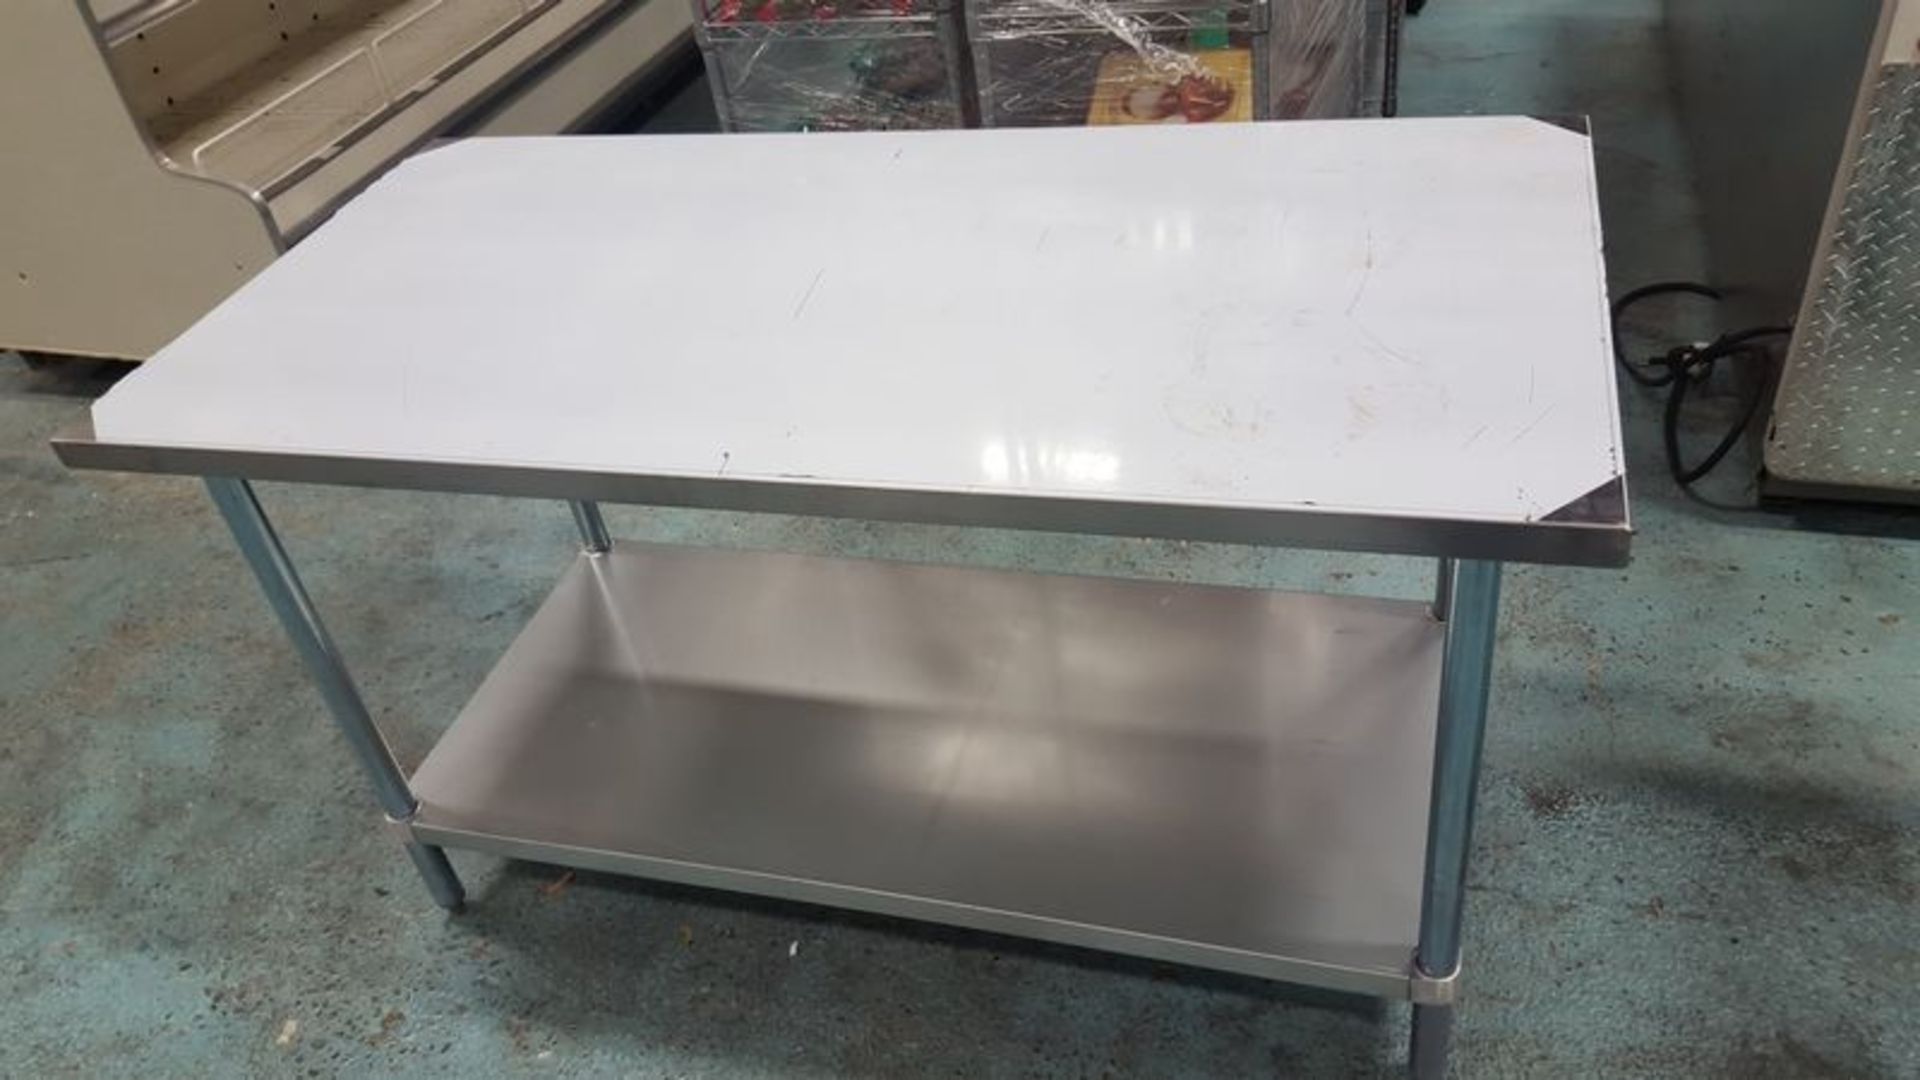 48 x 30"  - 2 Tier stainless steel work tables